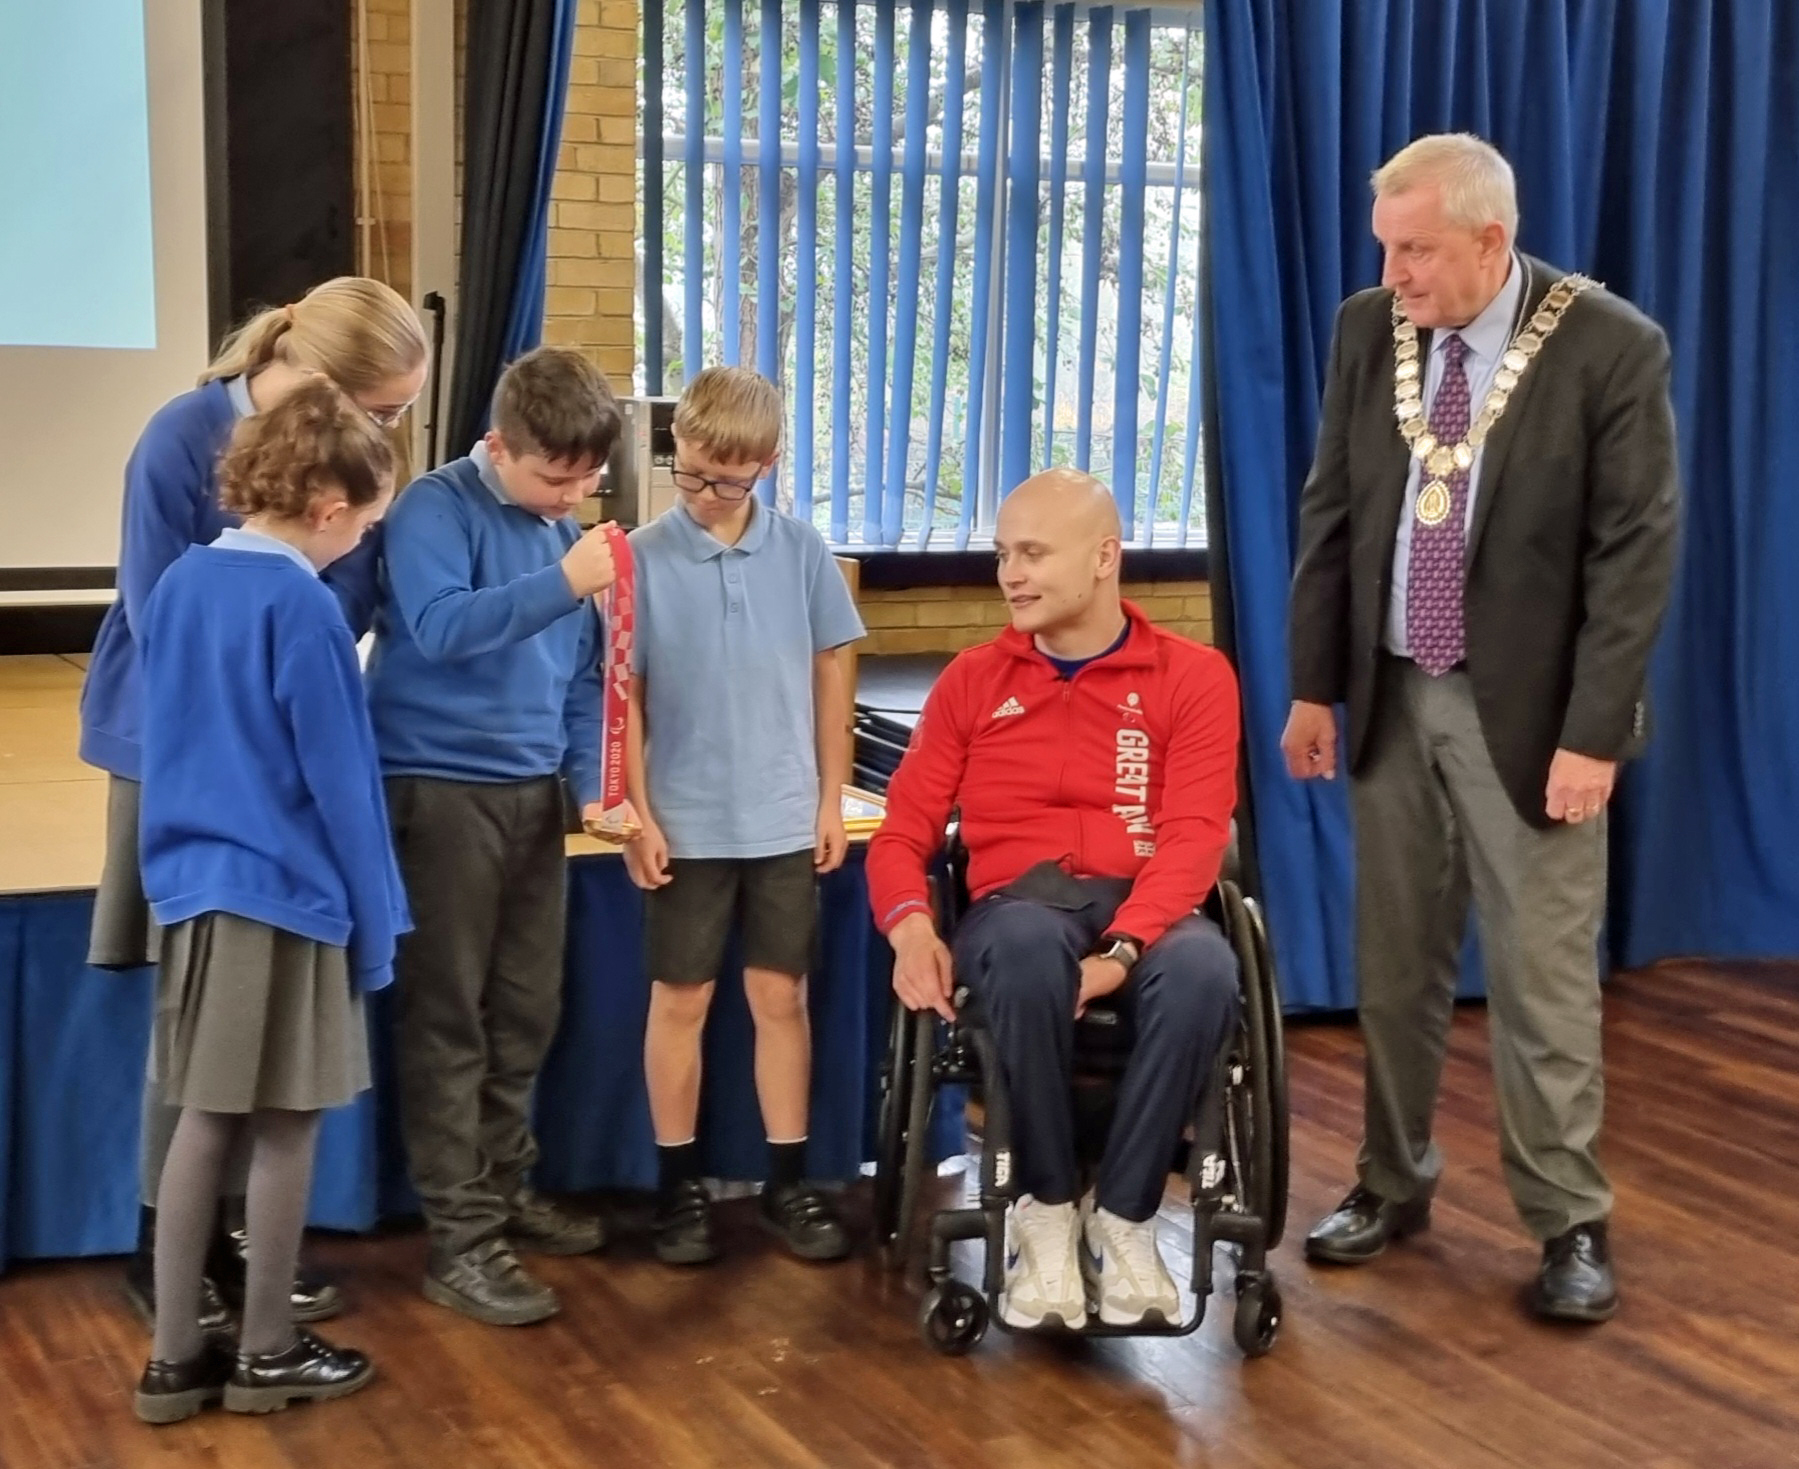 Jack Smith shows Sedgefield Primary School pupils his Paralympic gold medal, with Cllr Dave Jasper, Mayor of Sedgefield